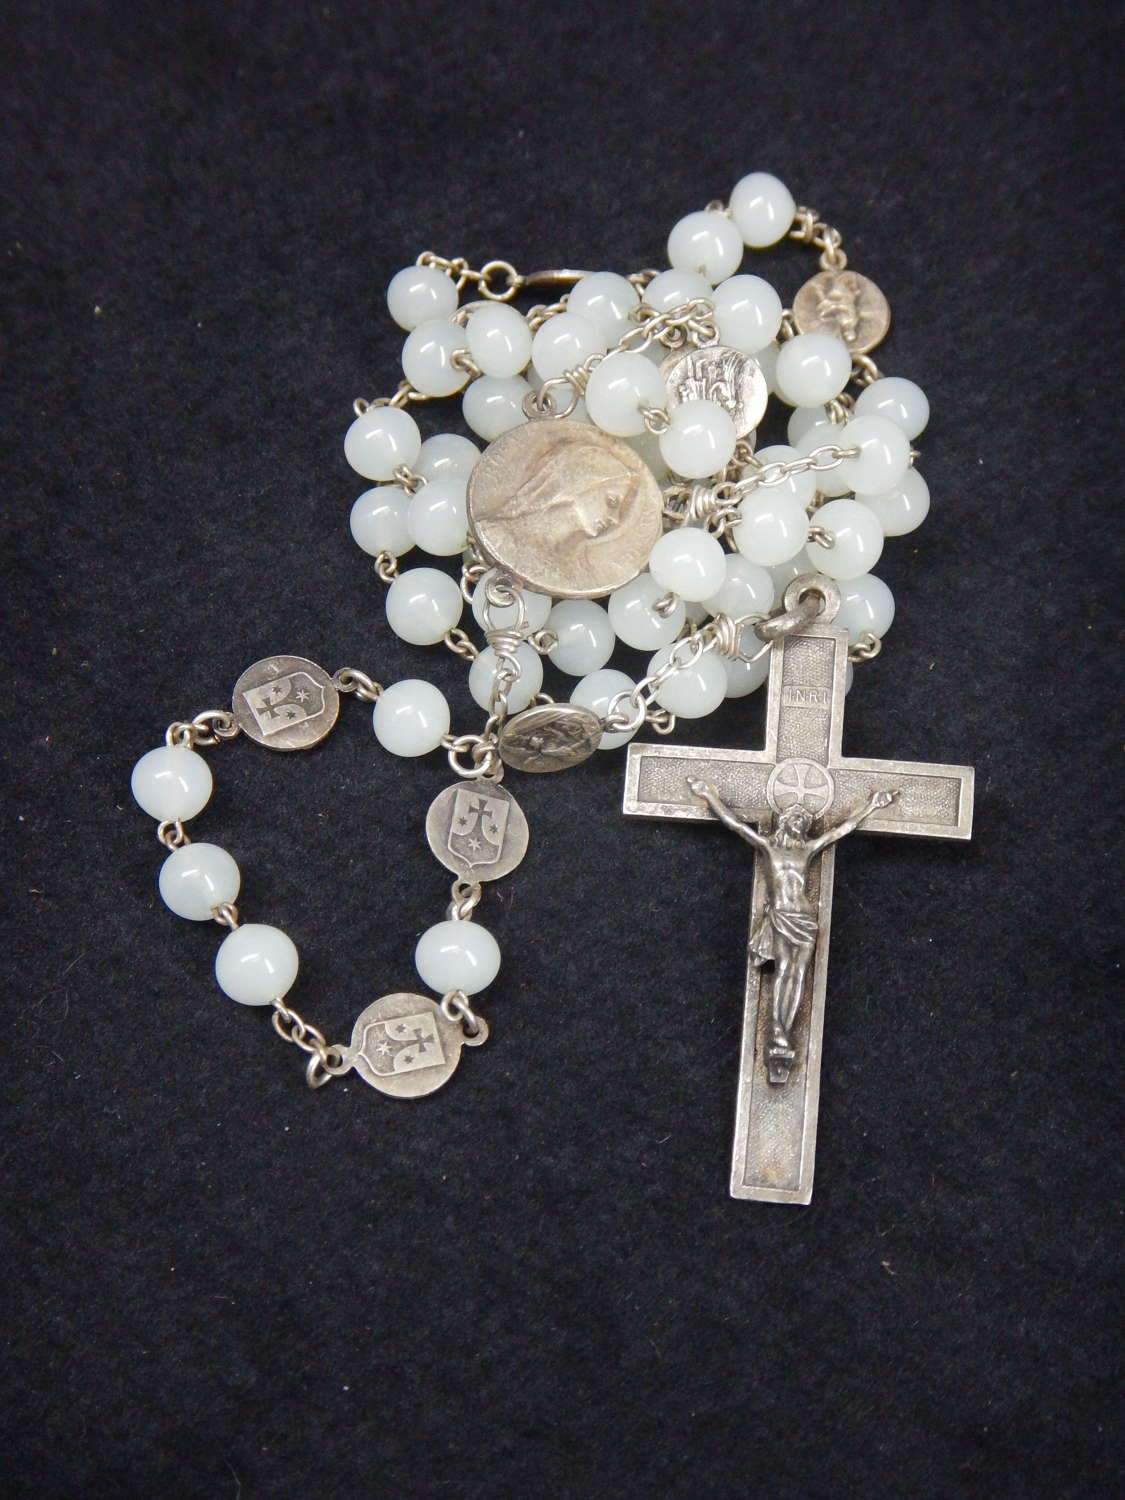 Carmelite Rosary - Silver Metal Antique Rosary Discalced Carmelite Ord